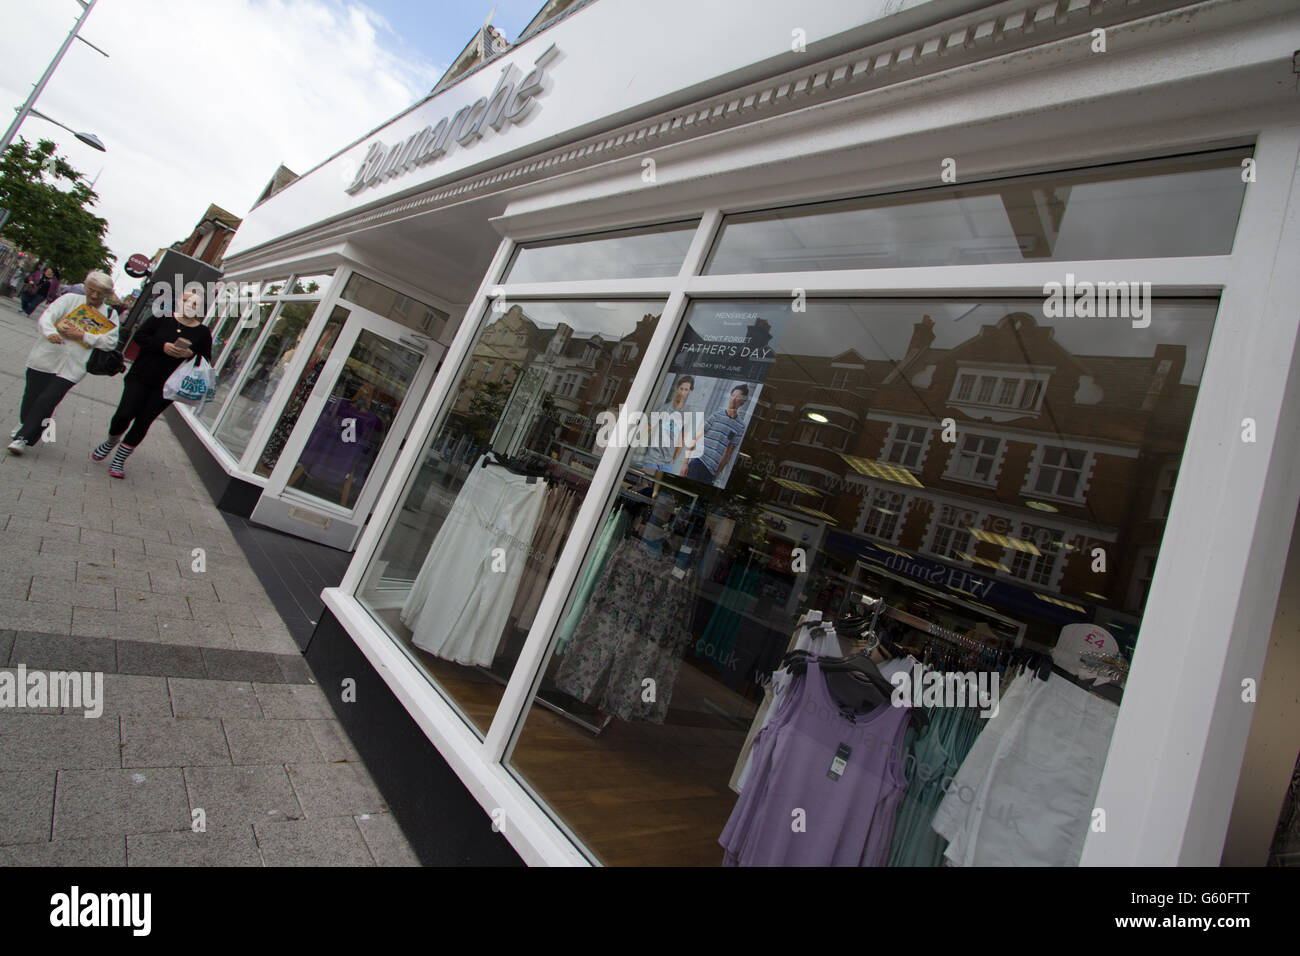 Bonmarche fashion shop store in High Street, Southend on Sea, Essex, UK  with sale signs in shop window. Half price, mega deals. Passers by Stock  Photo - Alamy